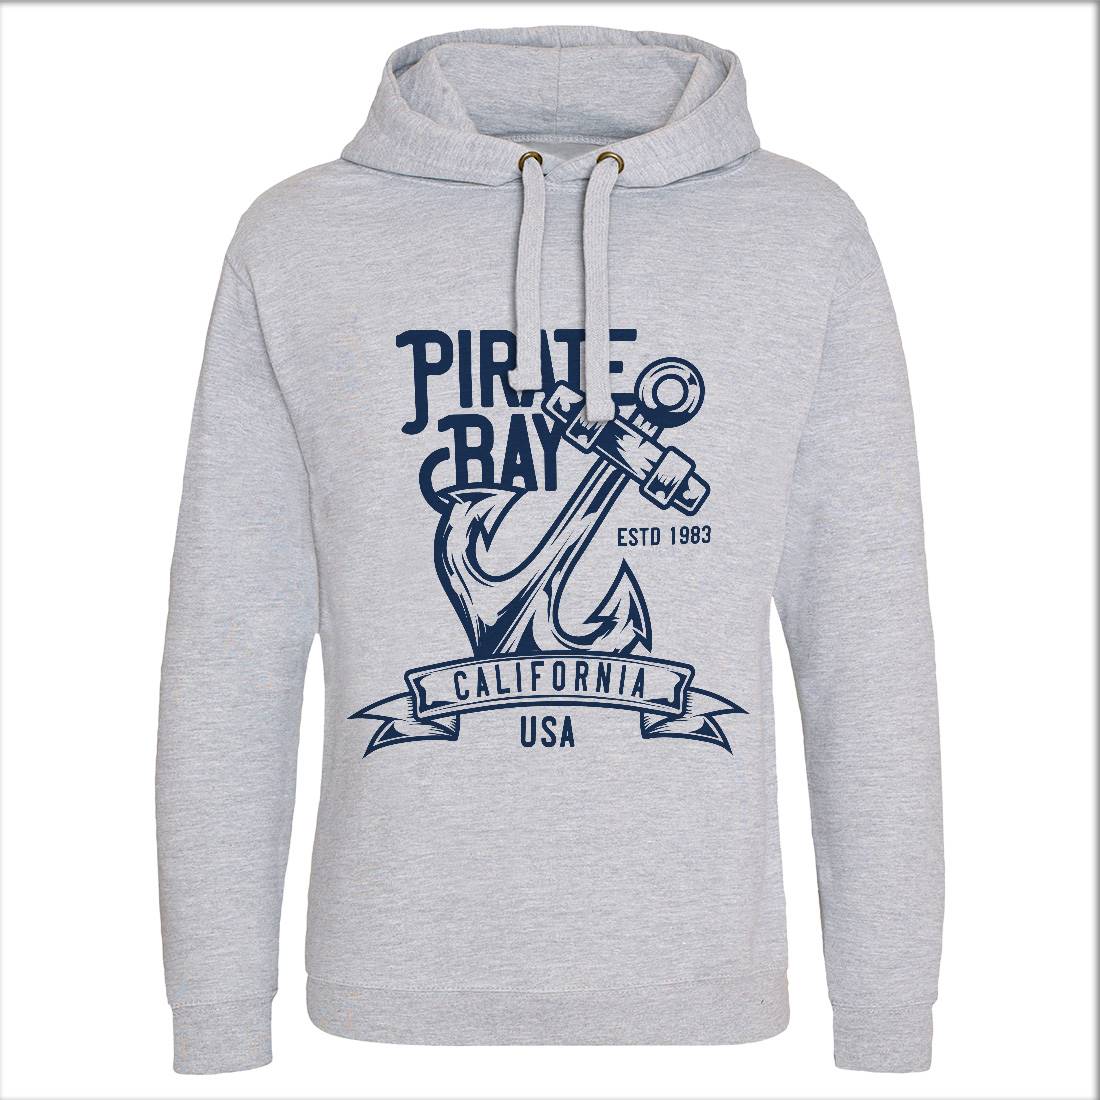 Pirate Mens Hoodie Without Pocket Navy B159